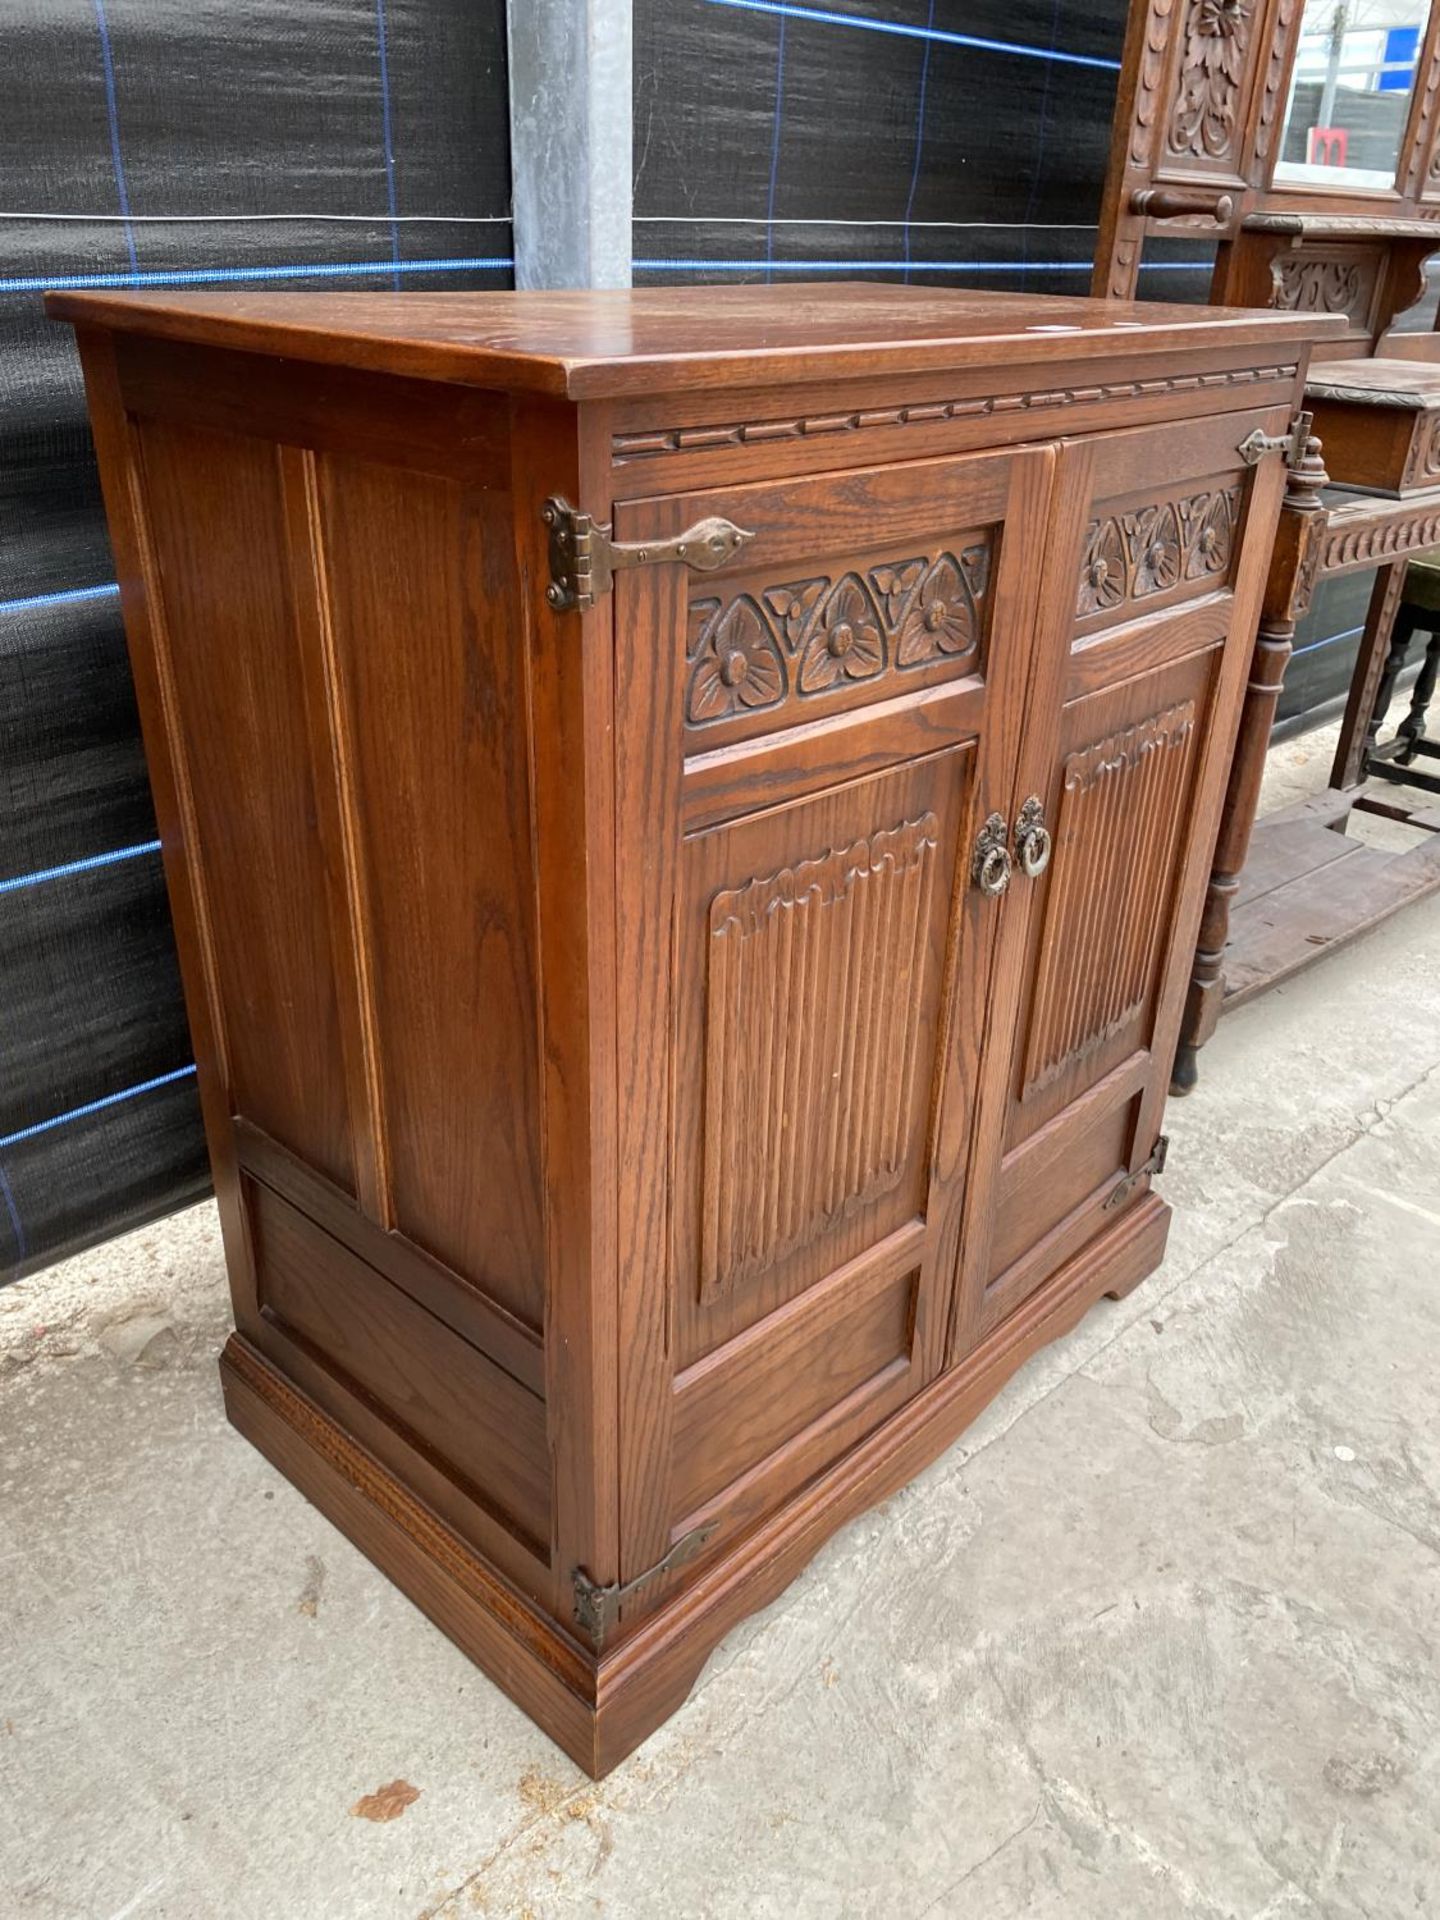 AN OAK 'OLD CHARM' TV CABINET, 34.5" WIDE - Image 2 of 2